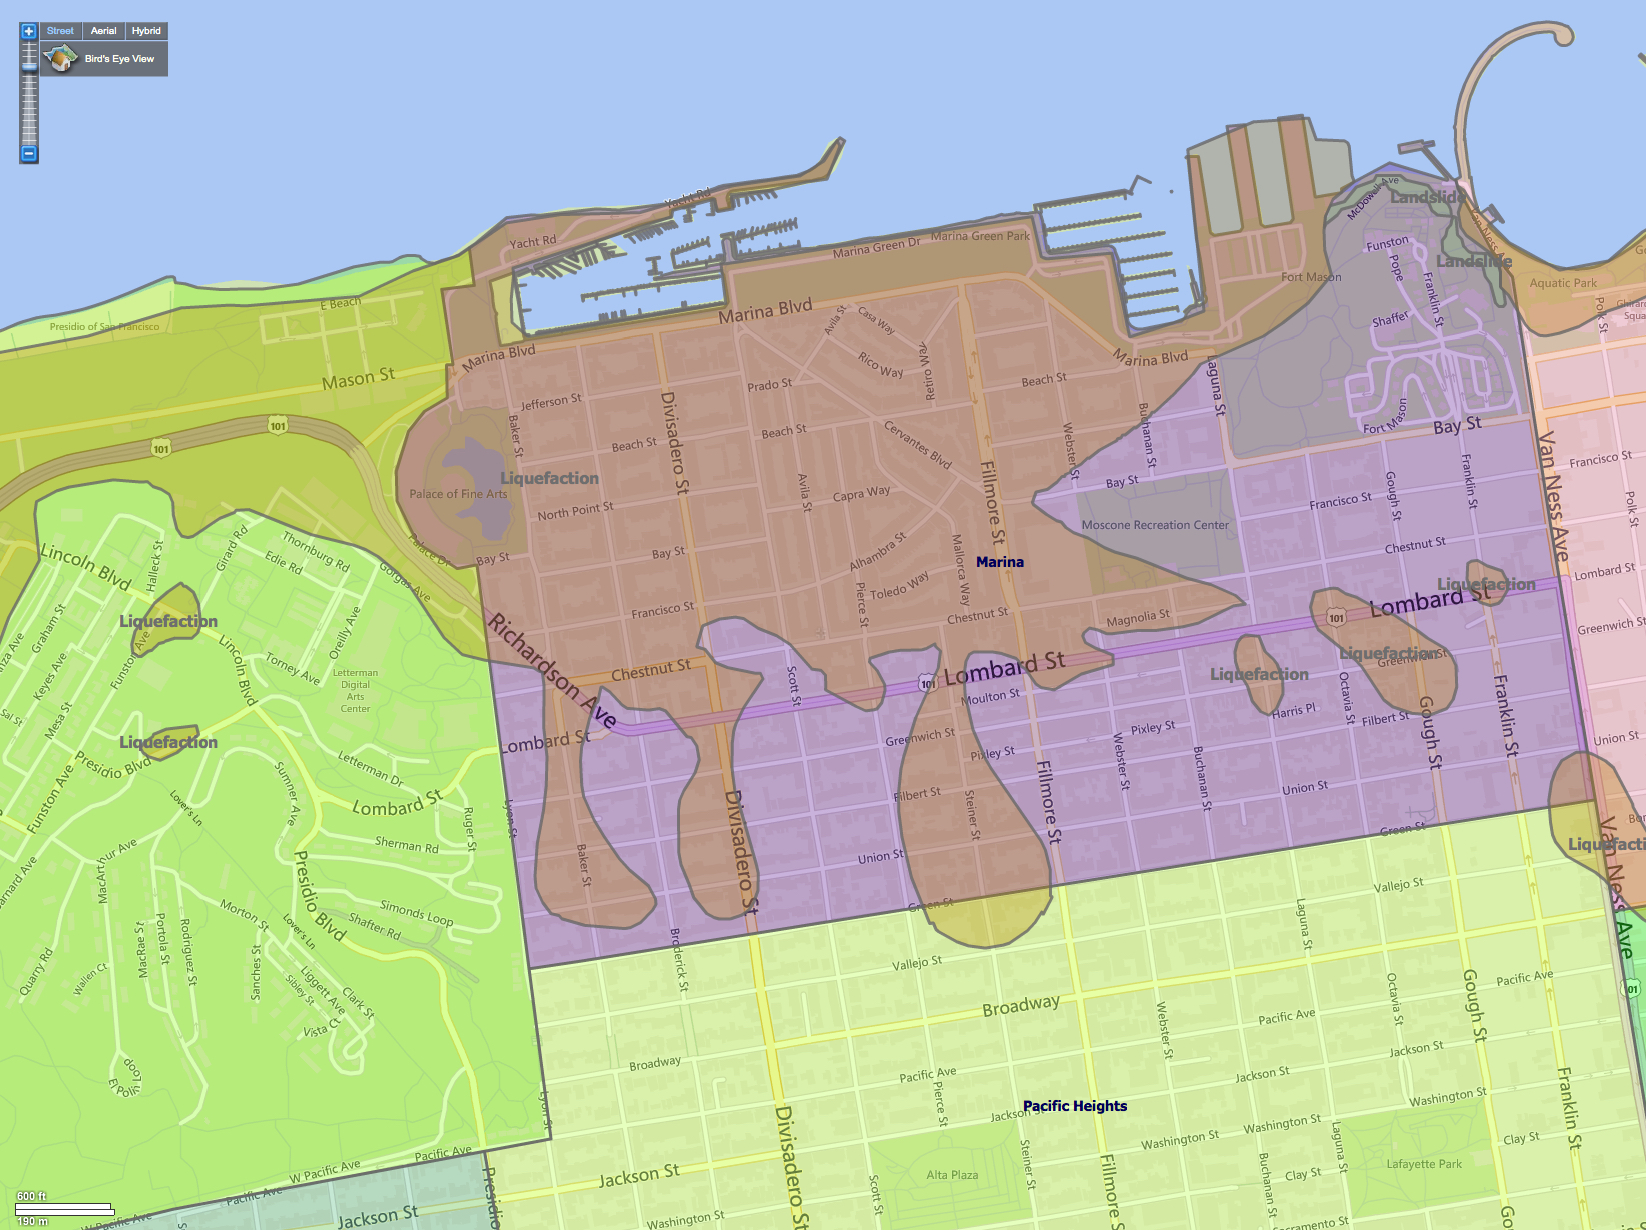 The Latest SF Liquefaction Zone Maps (for those who must know)